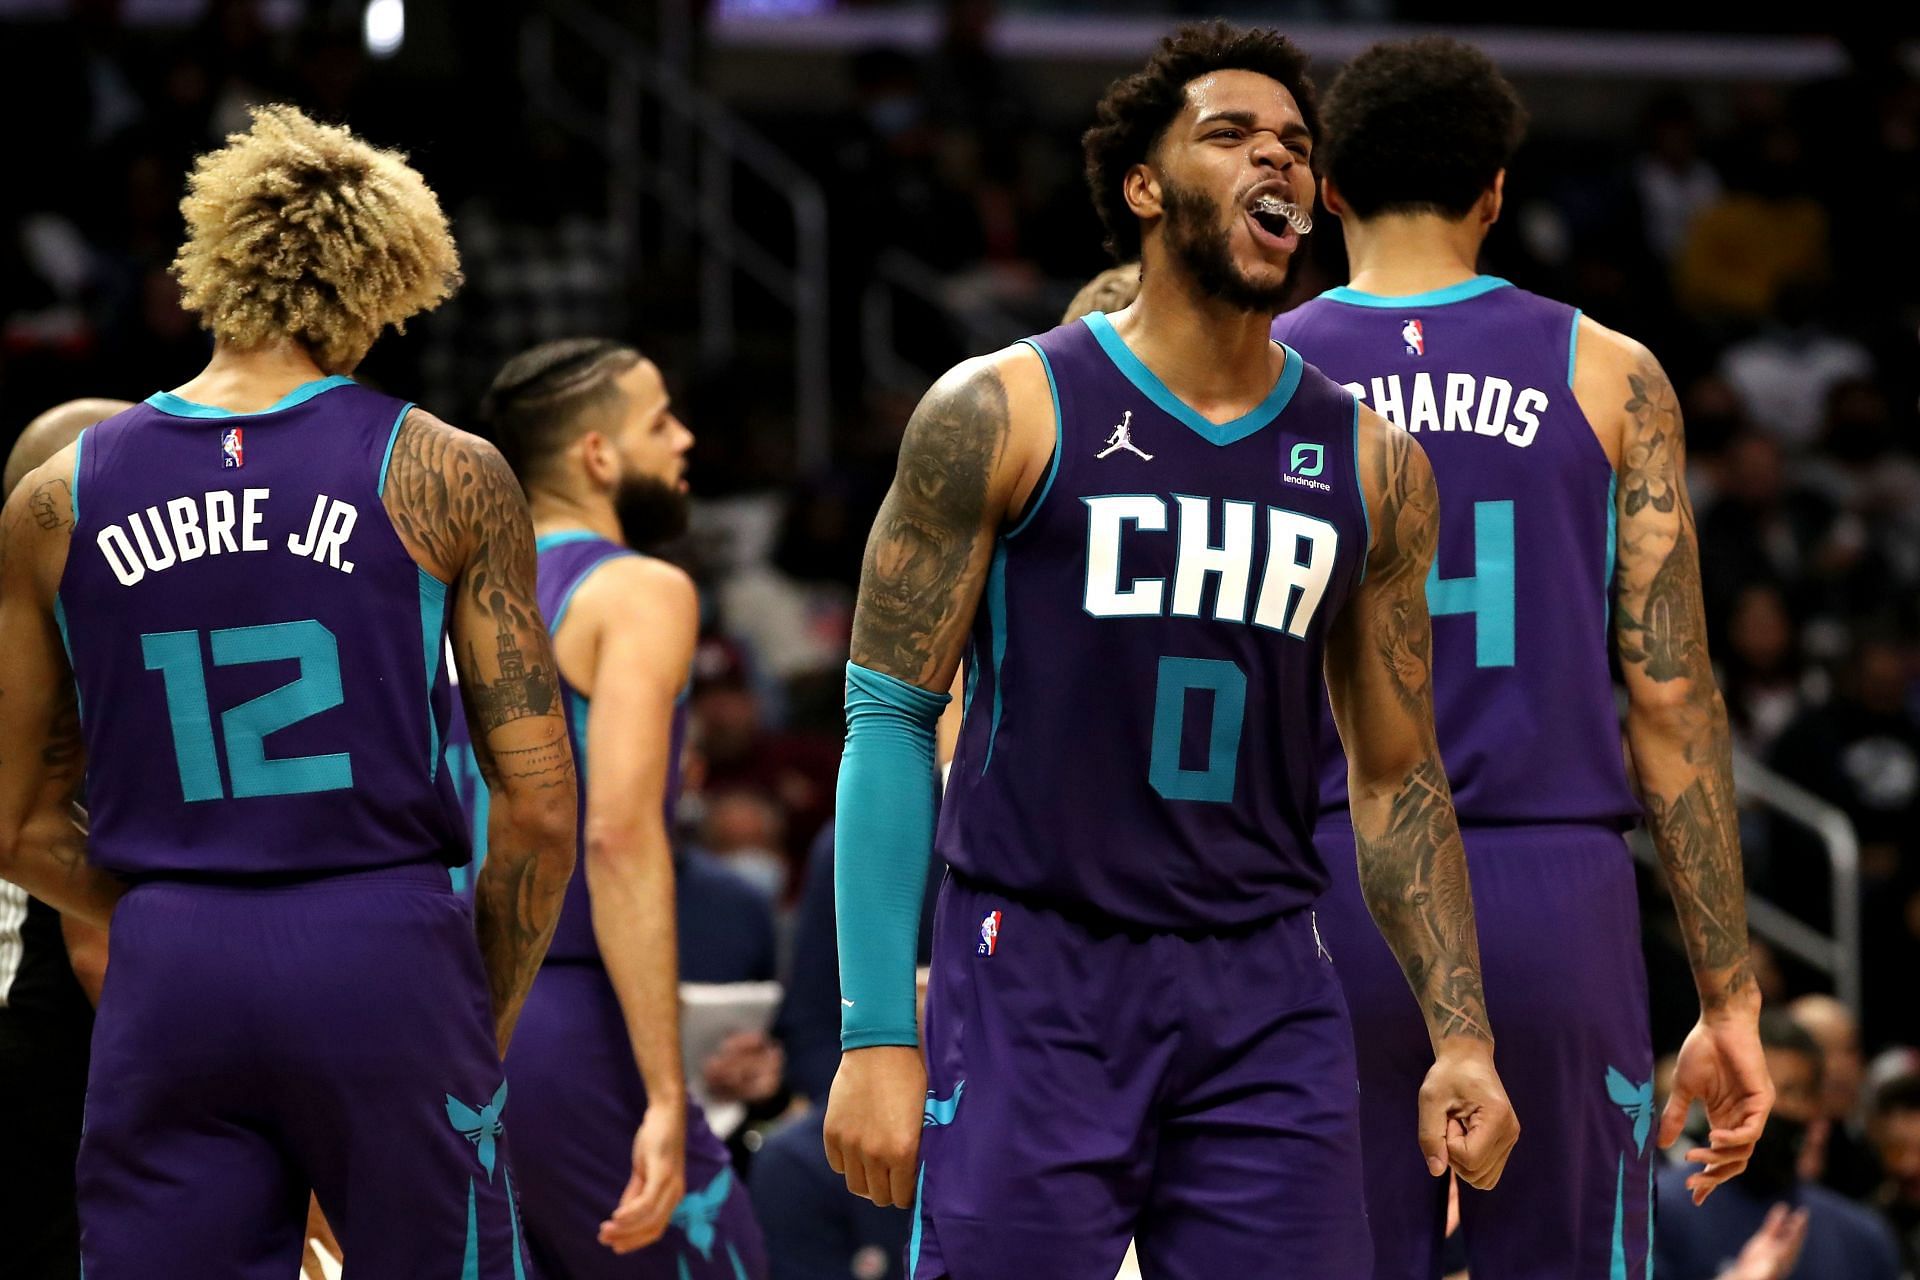 Charlotte Hornets against the LA Clippers